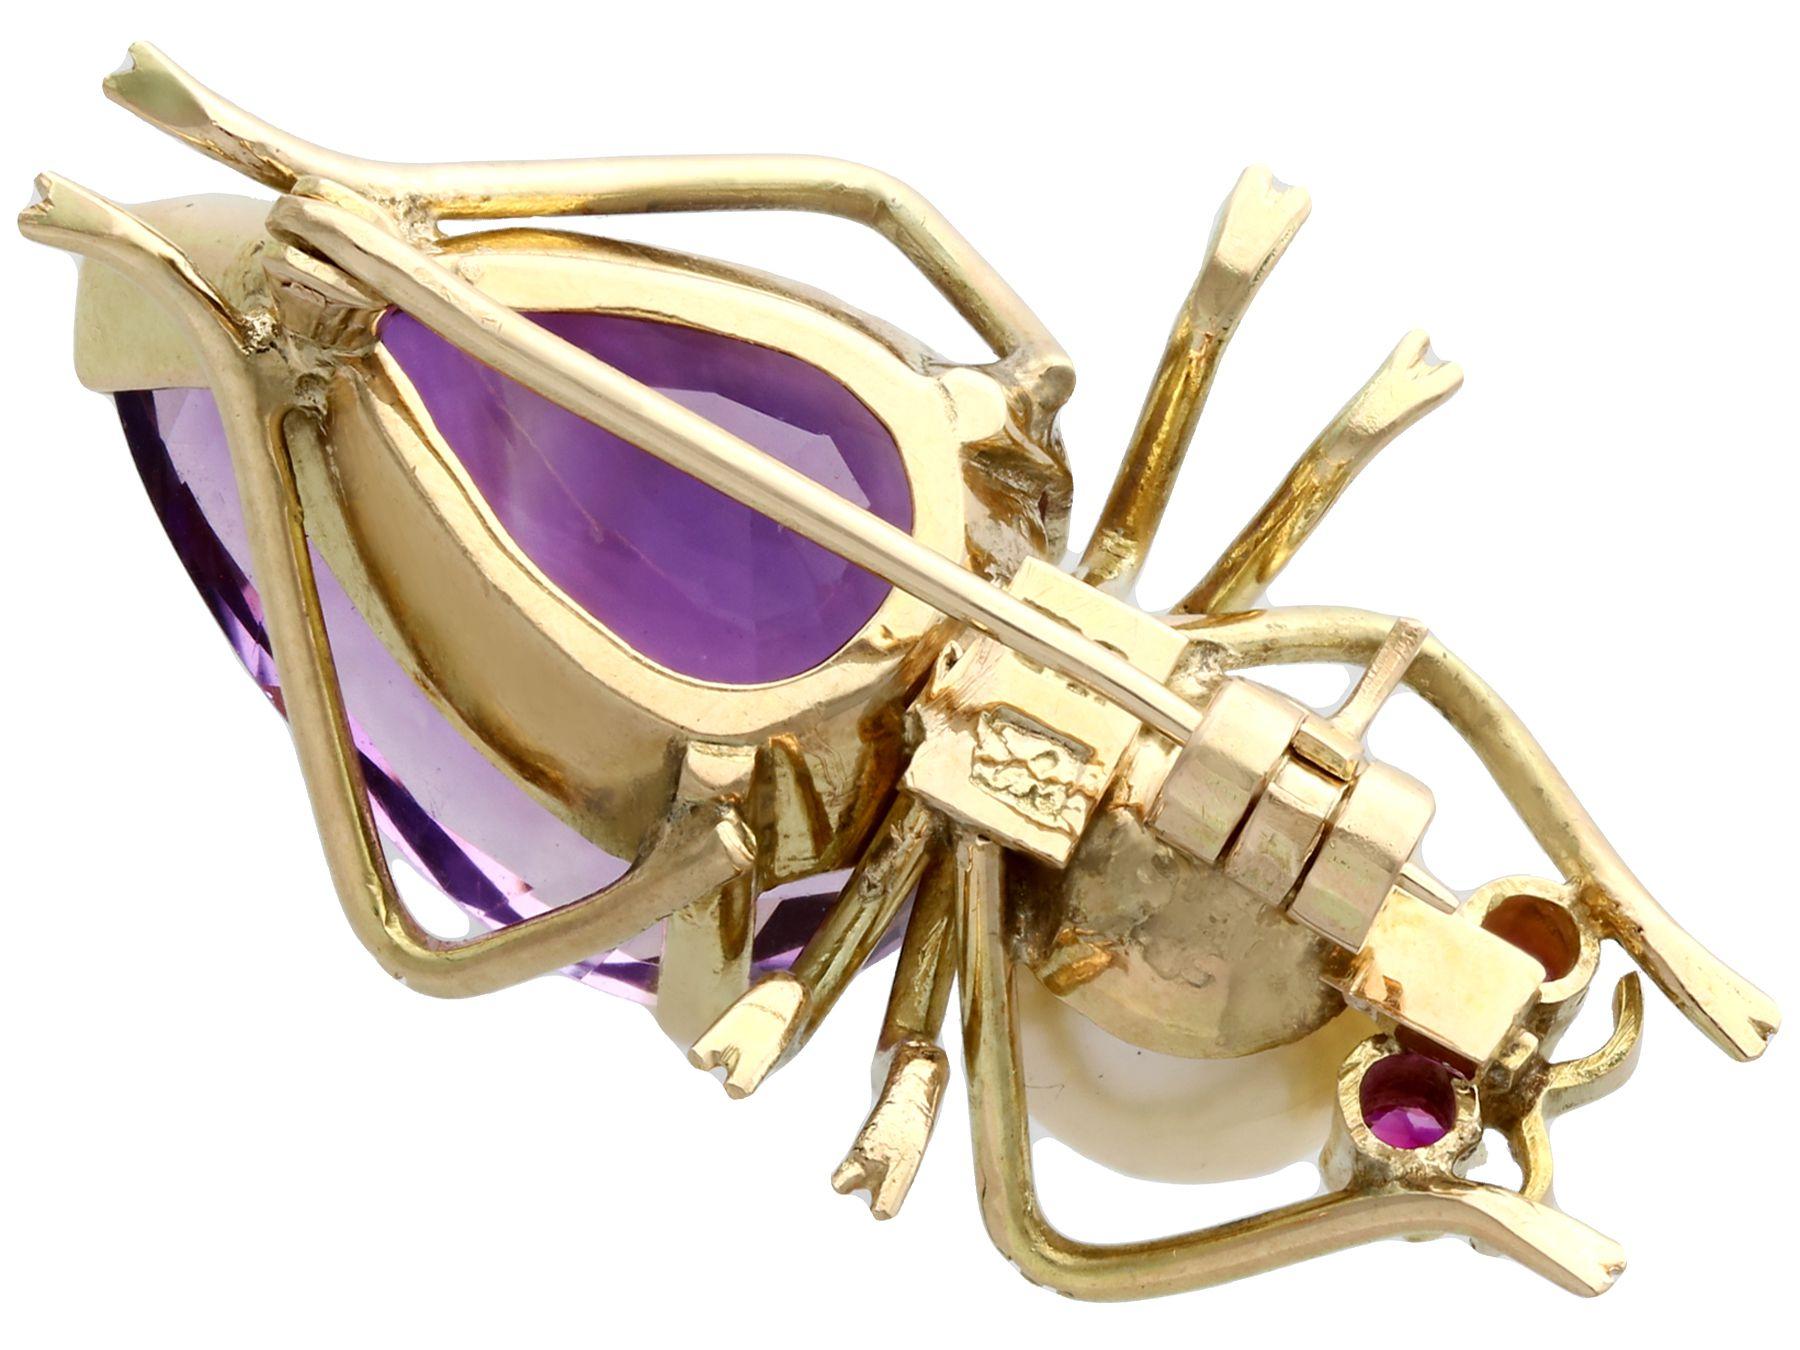 Vintage 12.39 Carat Amethyst Pearl and Ruby Yellow Gold Insect Brooch In Excellent Condition For Sale In Jesmond, Newcastle Upon Tyne